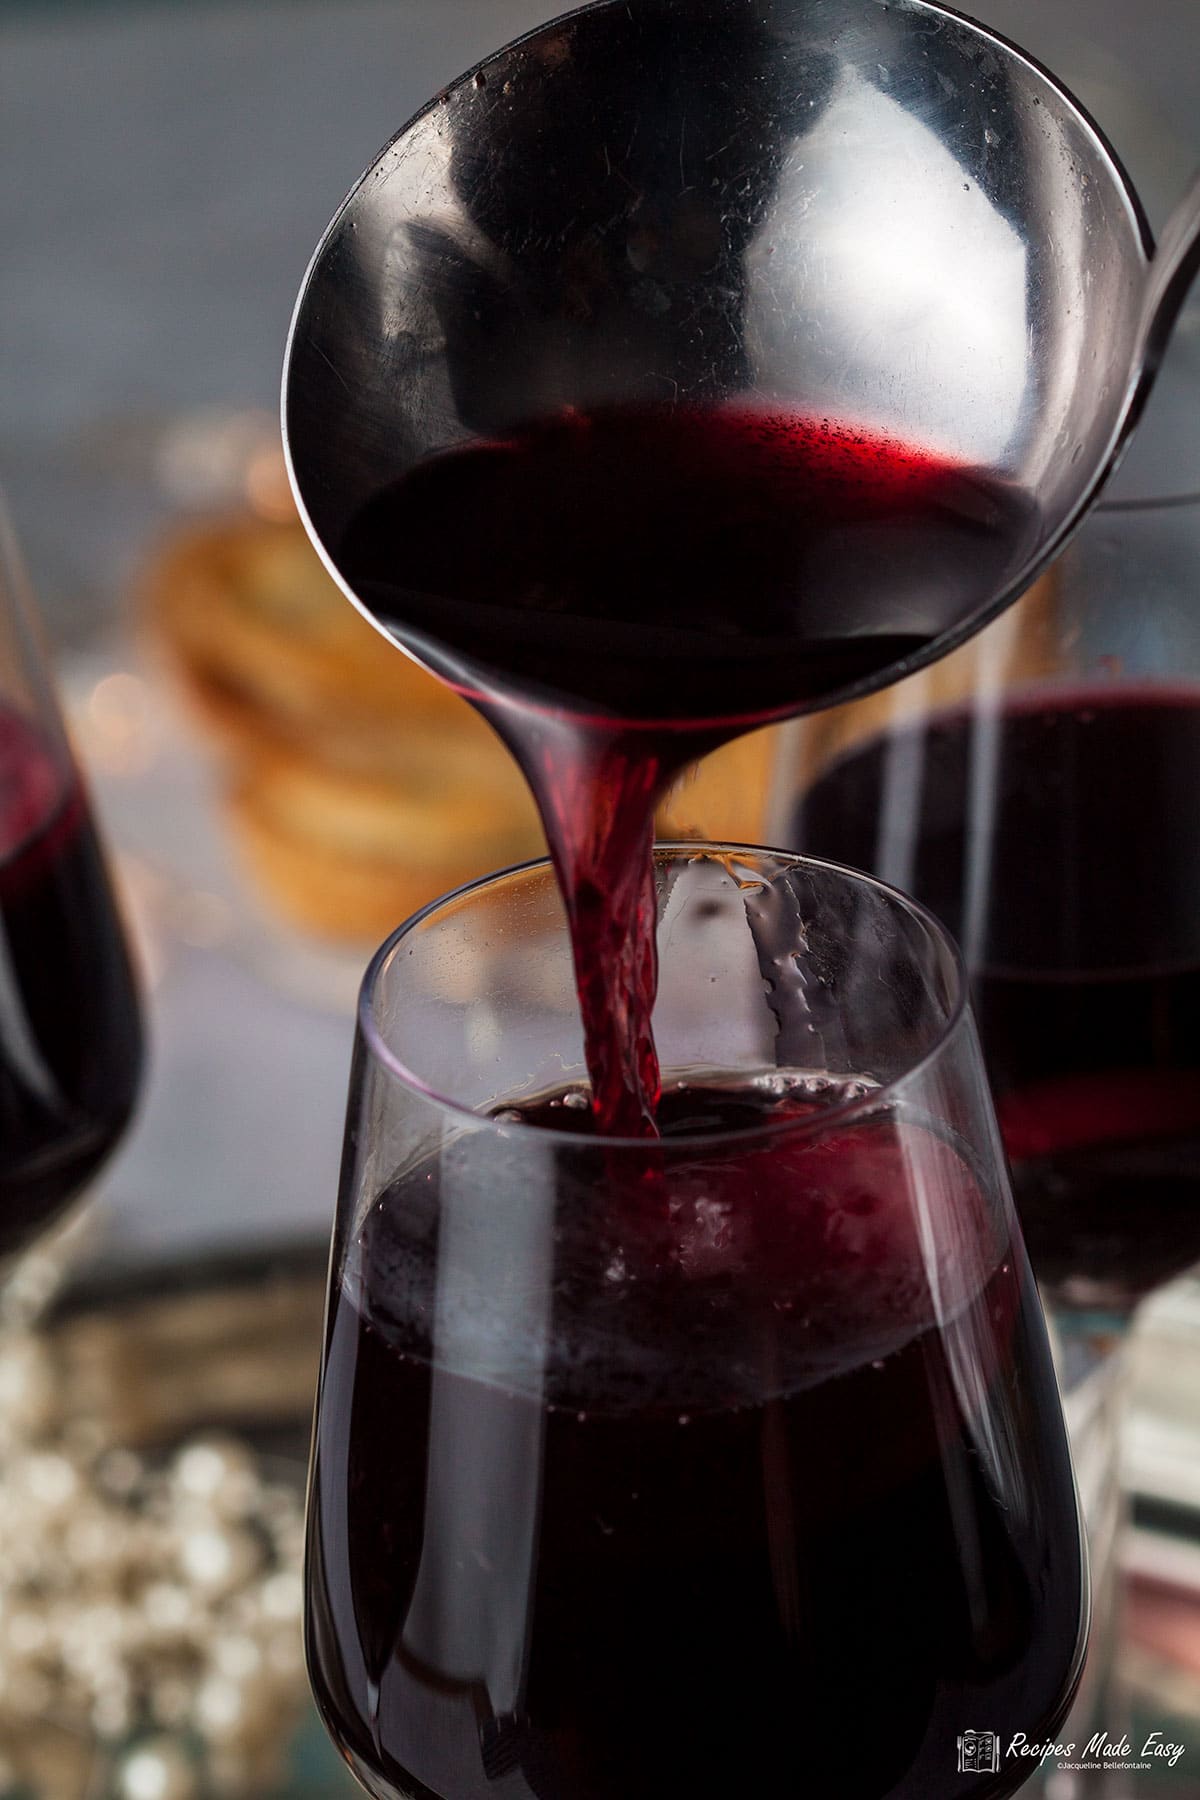 https://www.recipesmadeeasy.co.uk/wp-content/uploads/2021/11/pouring-mulled-wine-Edit.jpg